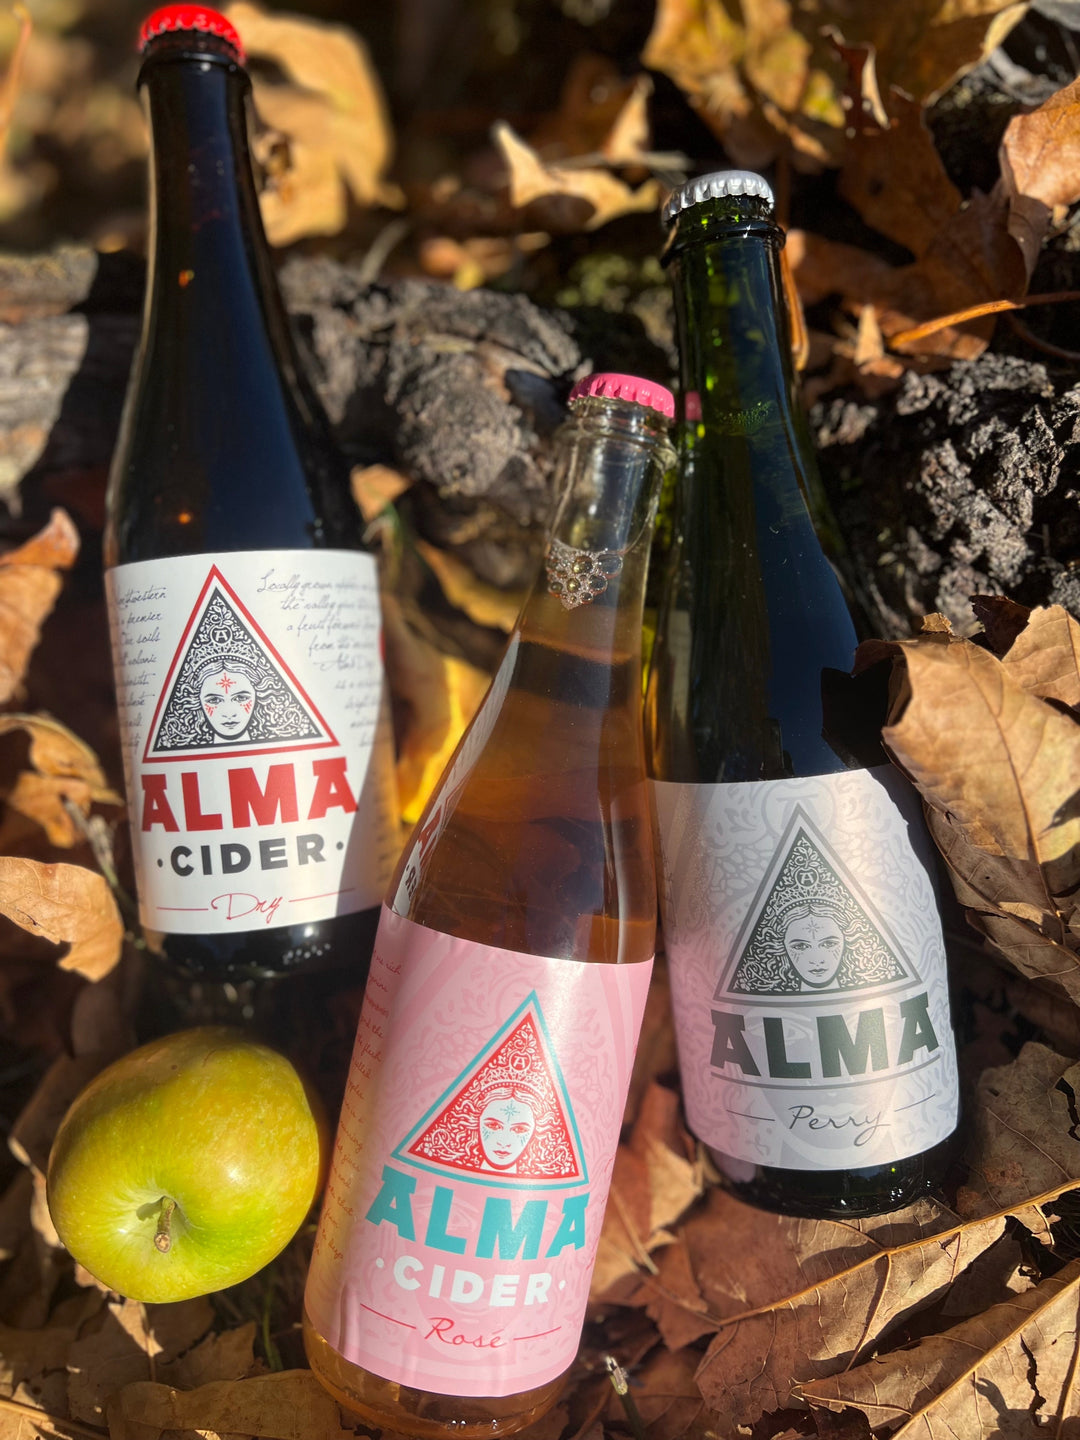 3 bottles of Alma Cider and one Arlie Red-Fleshed apple in a bed of fallen leaves